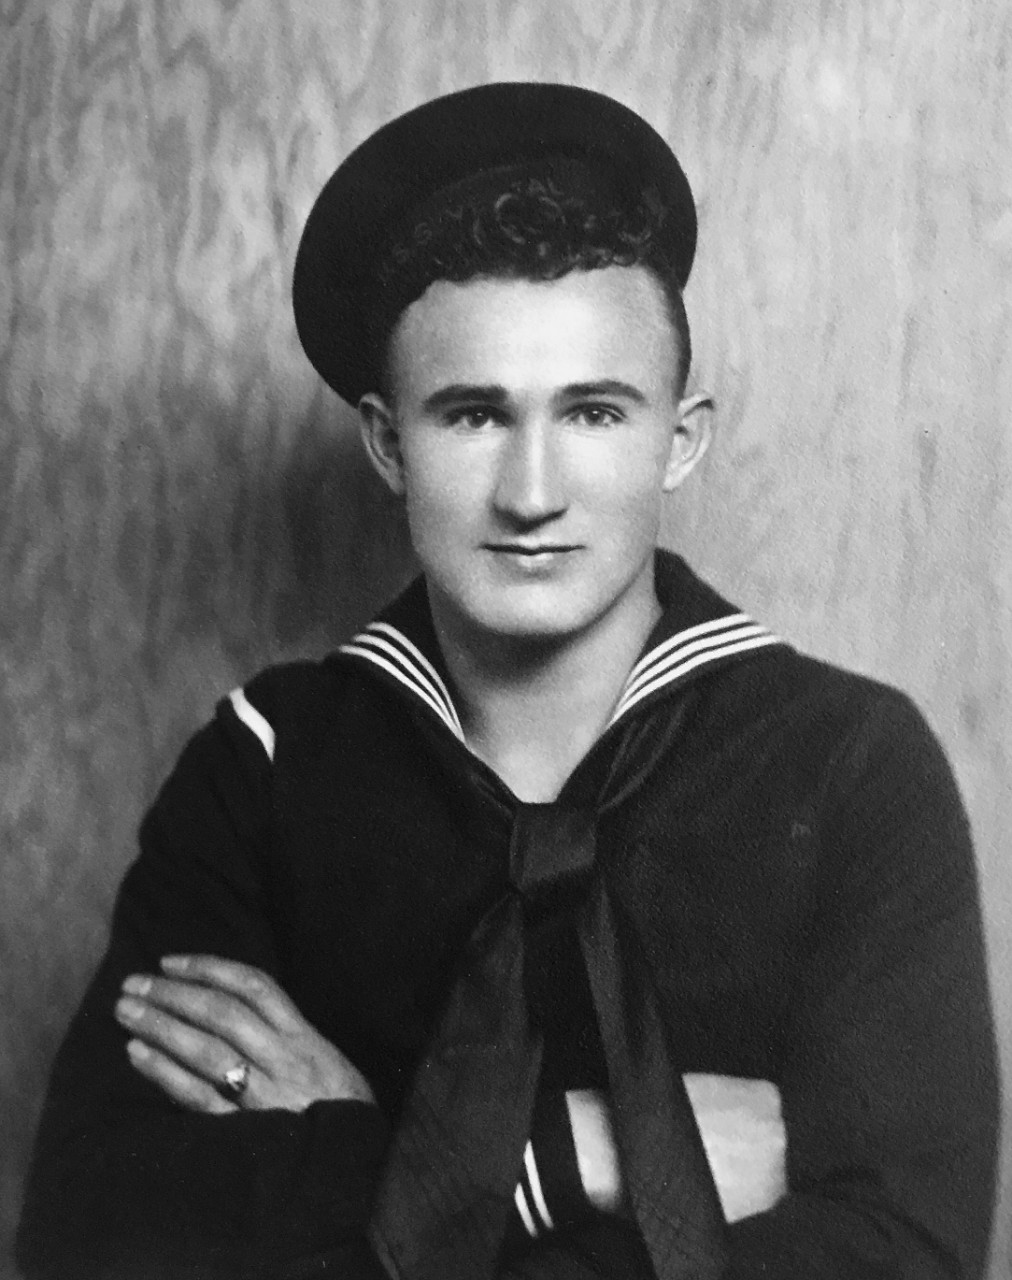 An undated photo of Chief Boatswain's Mate Joseph L. George from earlier in his career.  After enlisting in 1935, George was assigned to the repair ship USS Vestal which was moored alongside USS Arizona (BB 39) when the Japanese attack began on Dec. 7, 1941. (Photo Courtesy of George Family/Released)